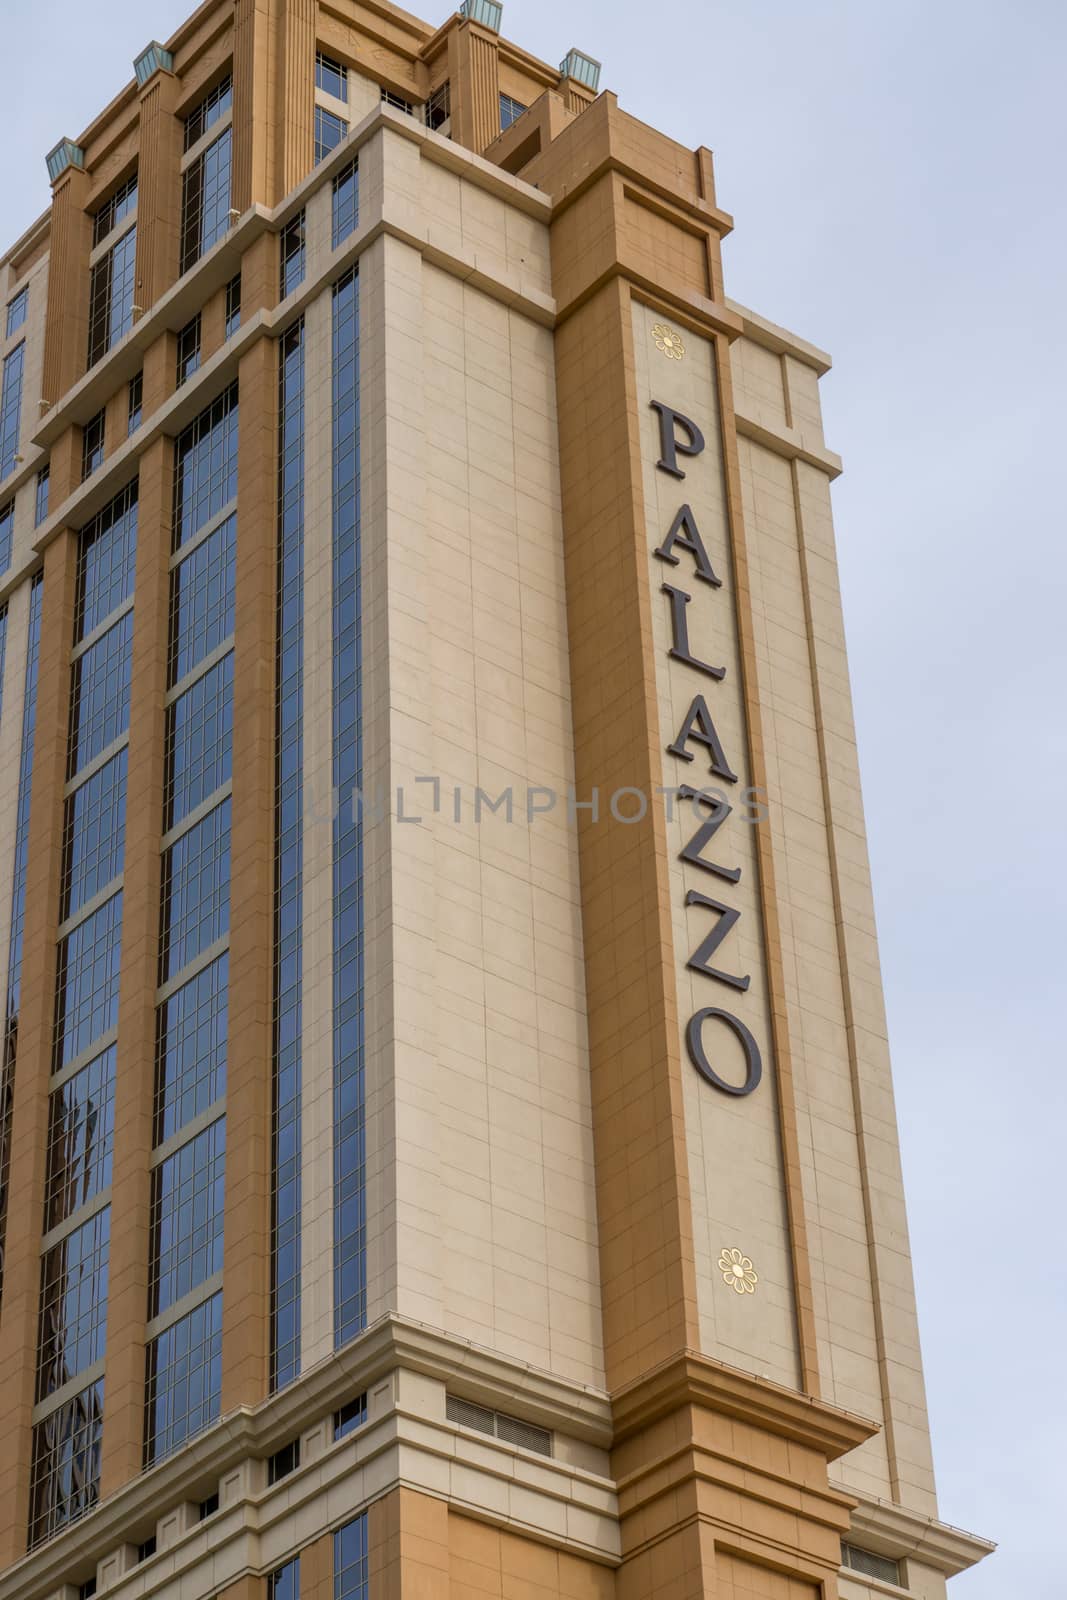 LAS VEGAS, NV/USA - FEBRUARY 14, 2016: The Palazzo hotel and casino on the Las Vegas Strip. The Palazzo is owned by the Las Vegas Sands Corporation.